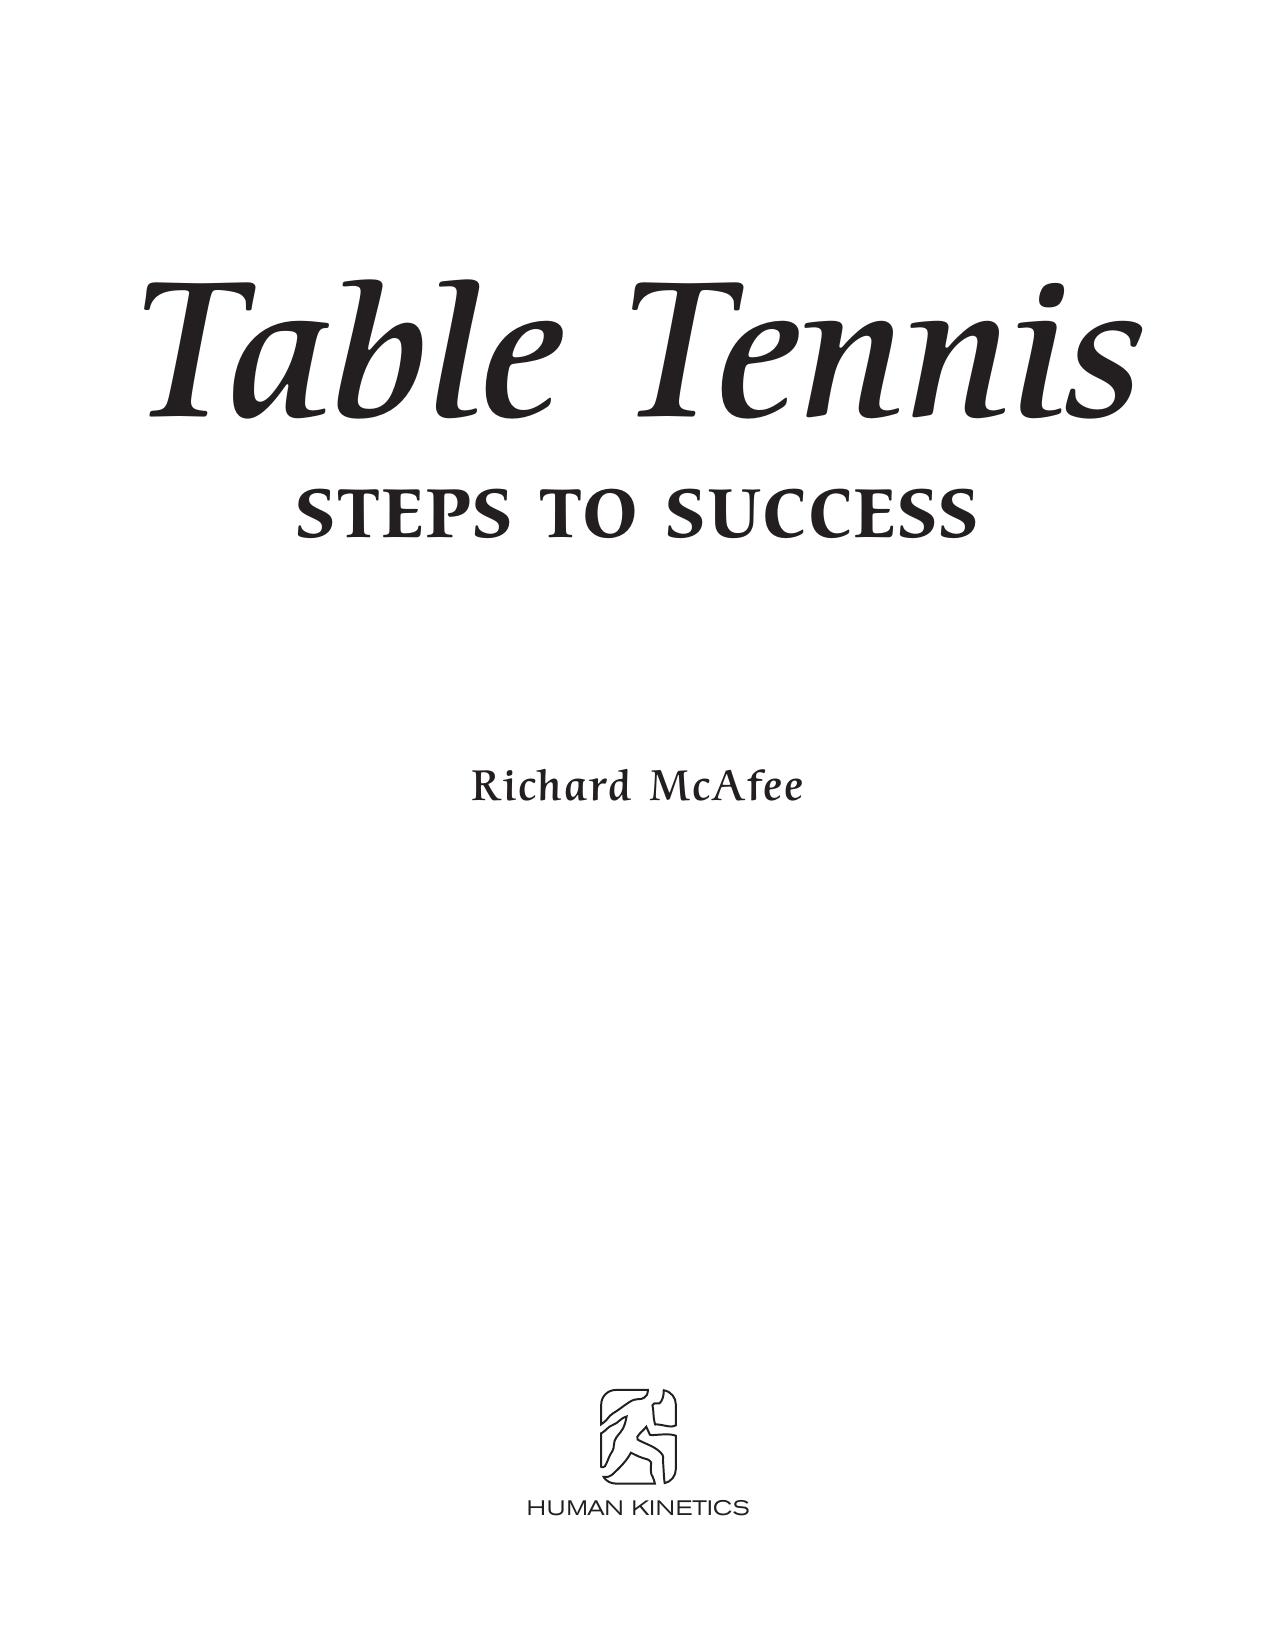 Table Tennis Steps to Success 2011